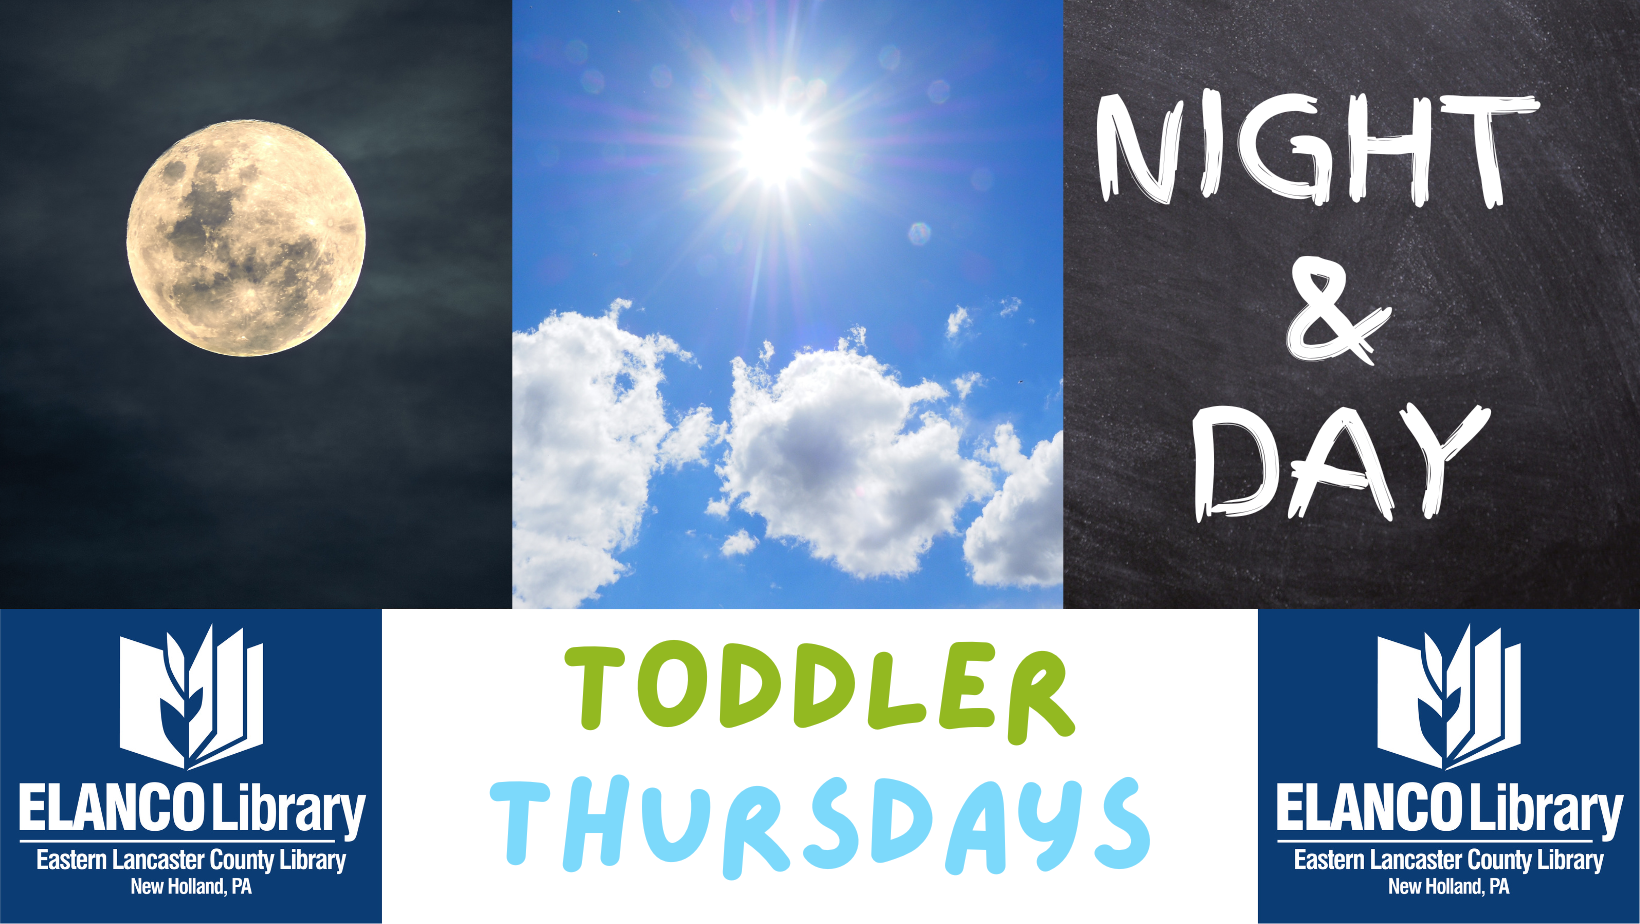 Toddler Thursday Night and Day